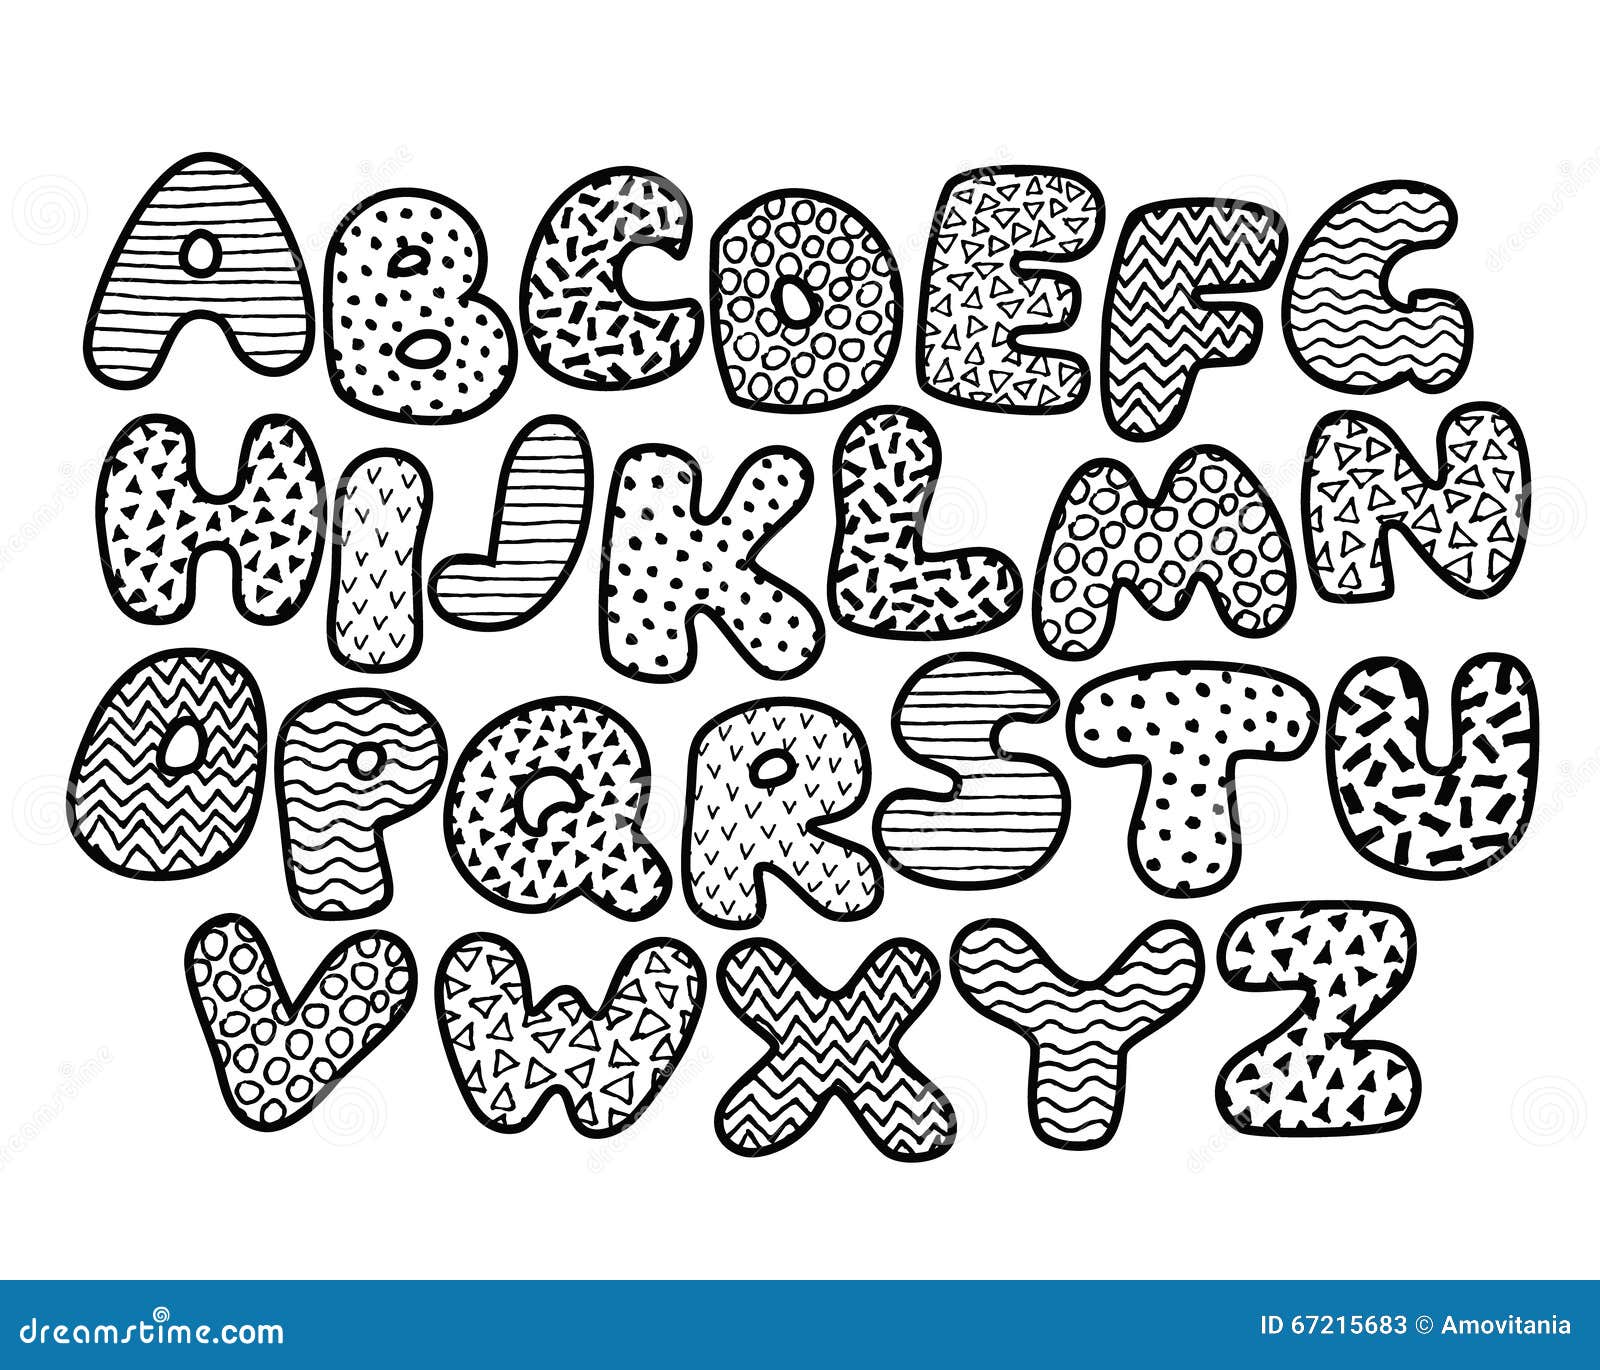 Funny Alphabet Coloring Page Stock Vector Illustration Of Chevron